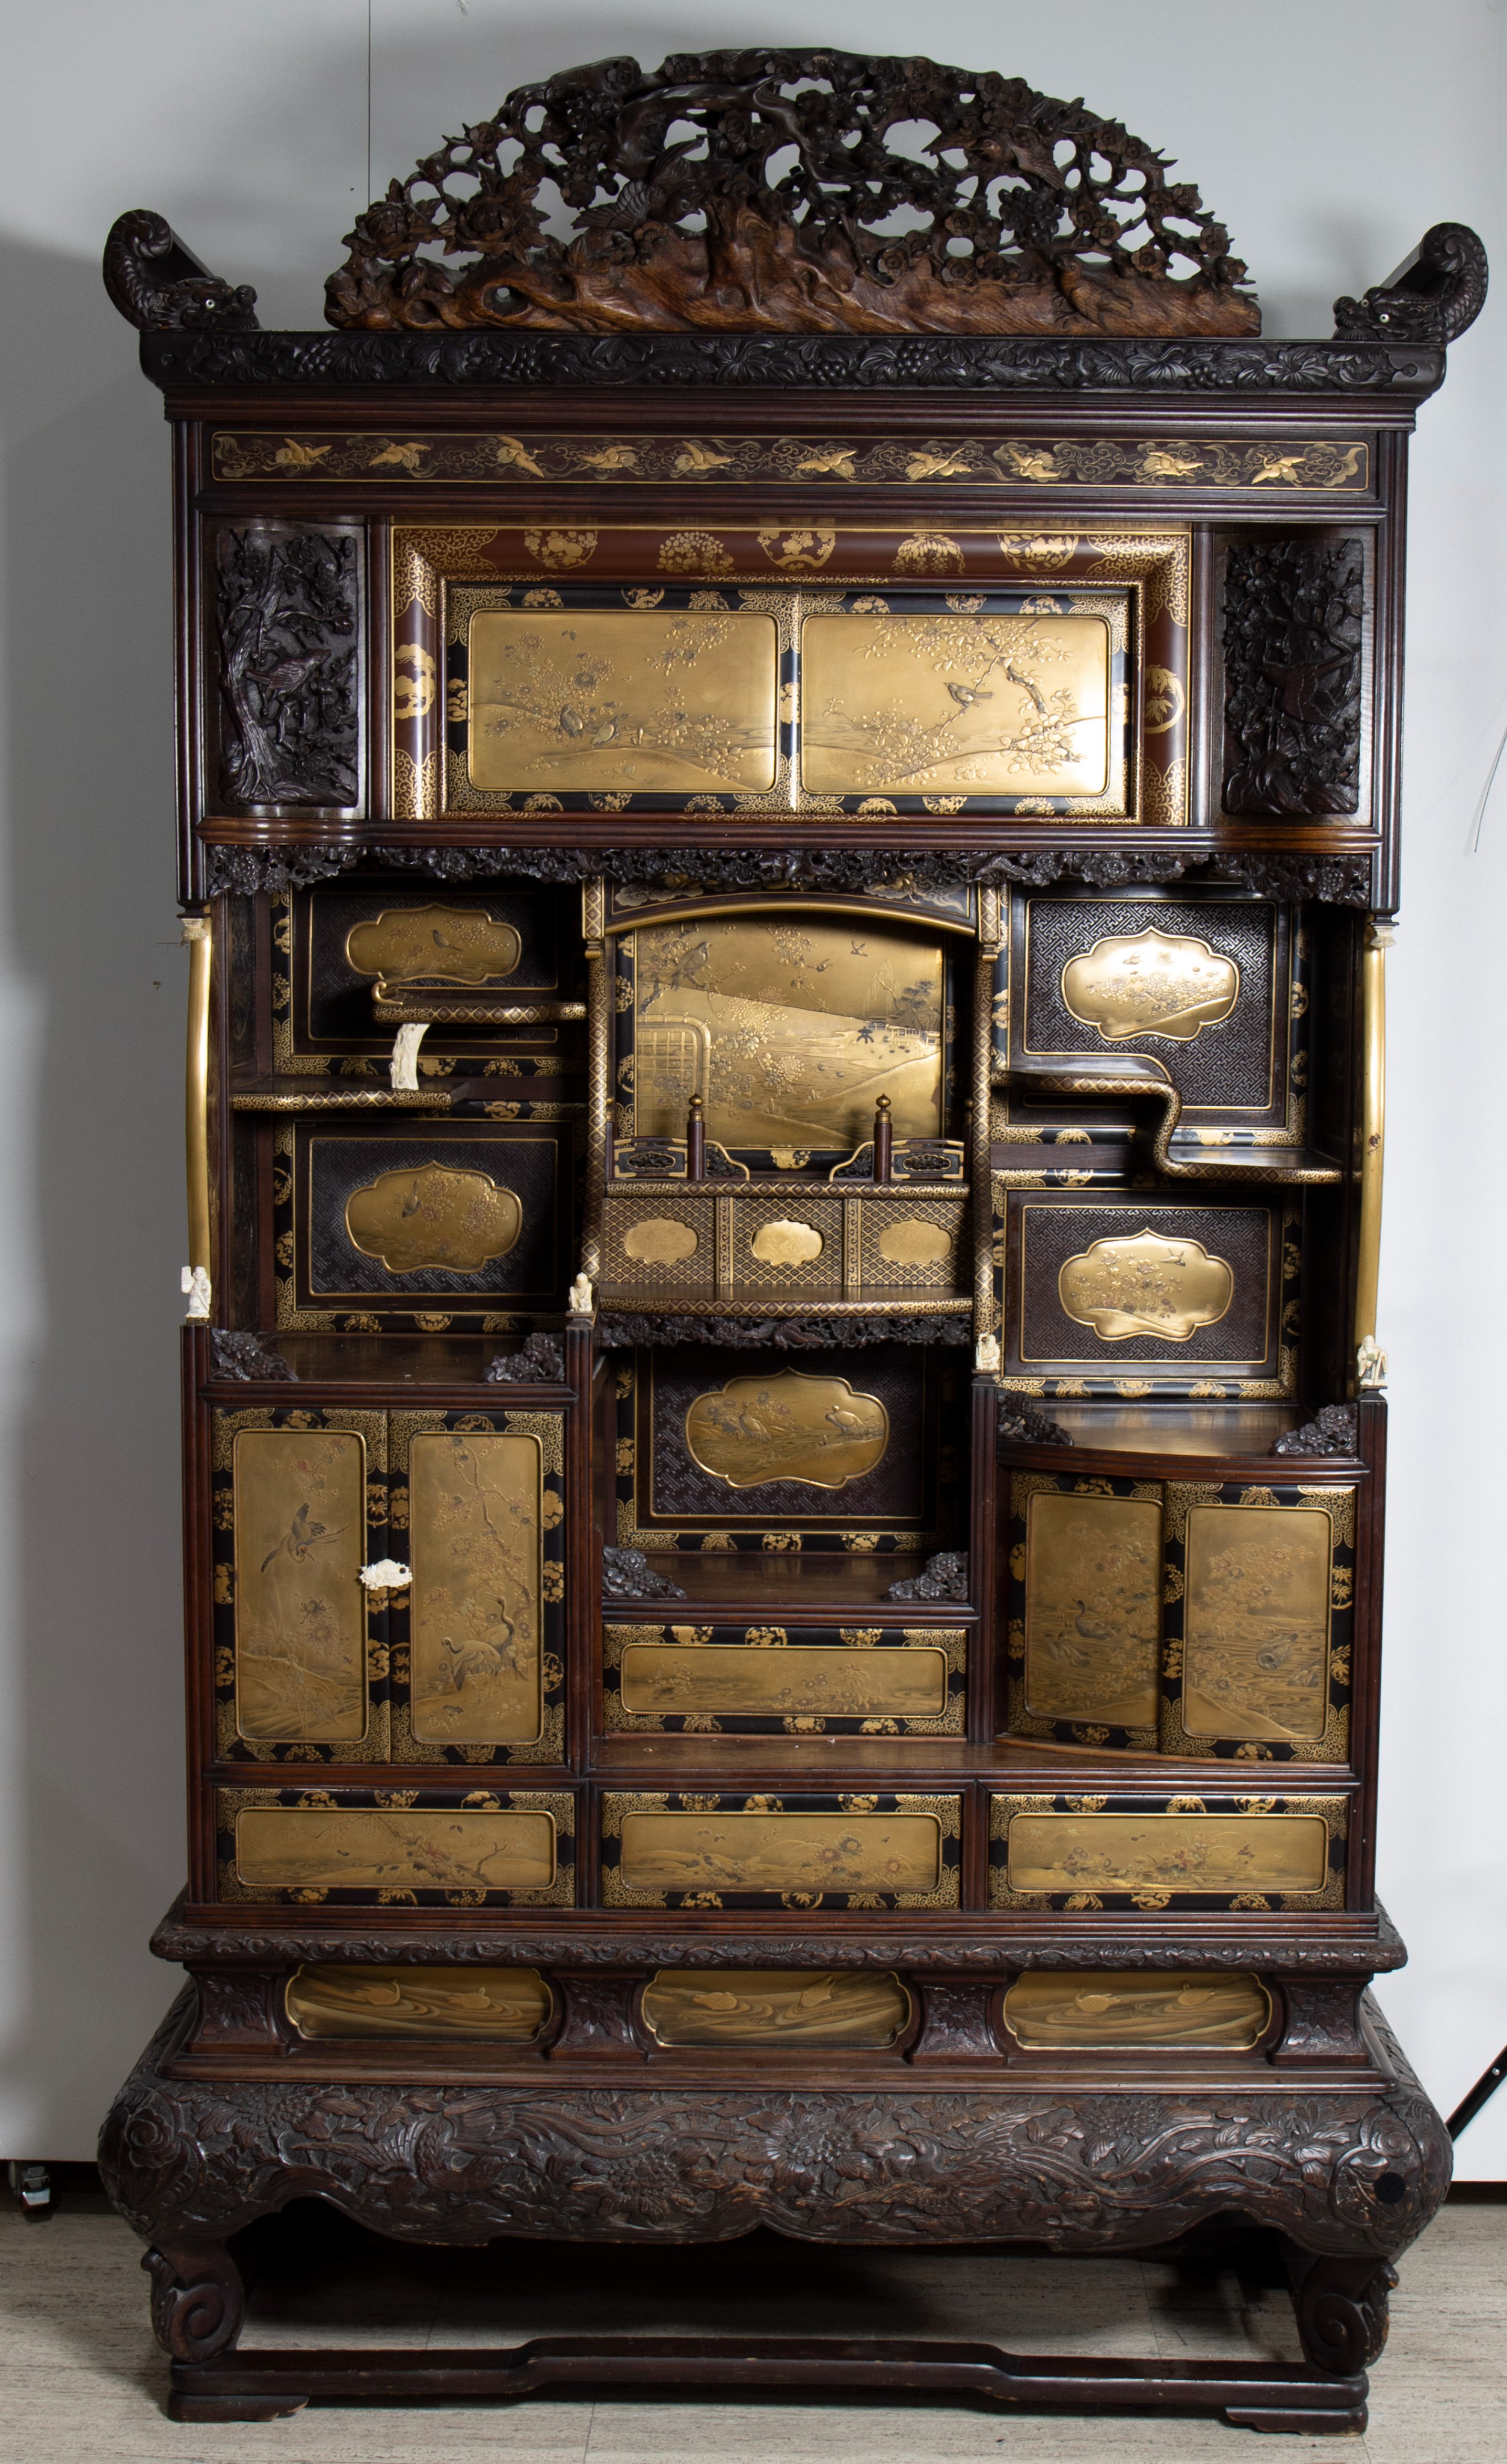 A superb large Shodana cabinet with gold lacquered panels and doors, with open carved crest and frie